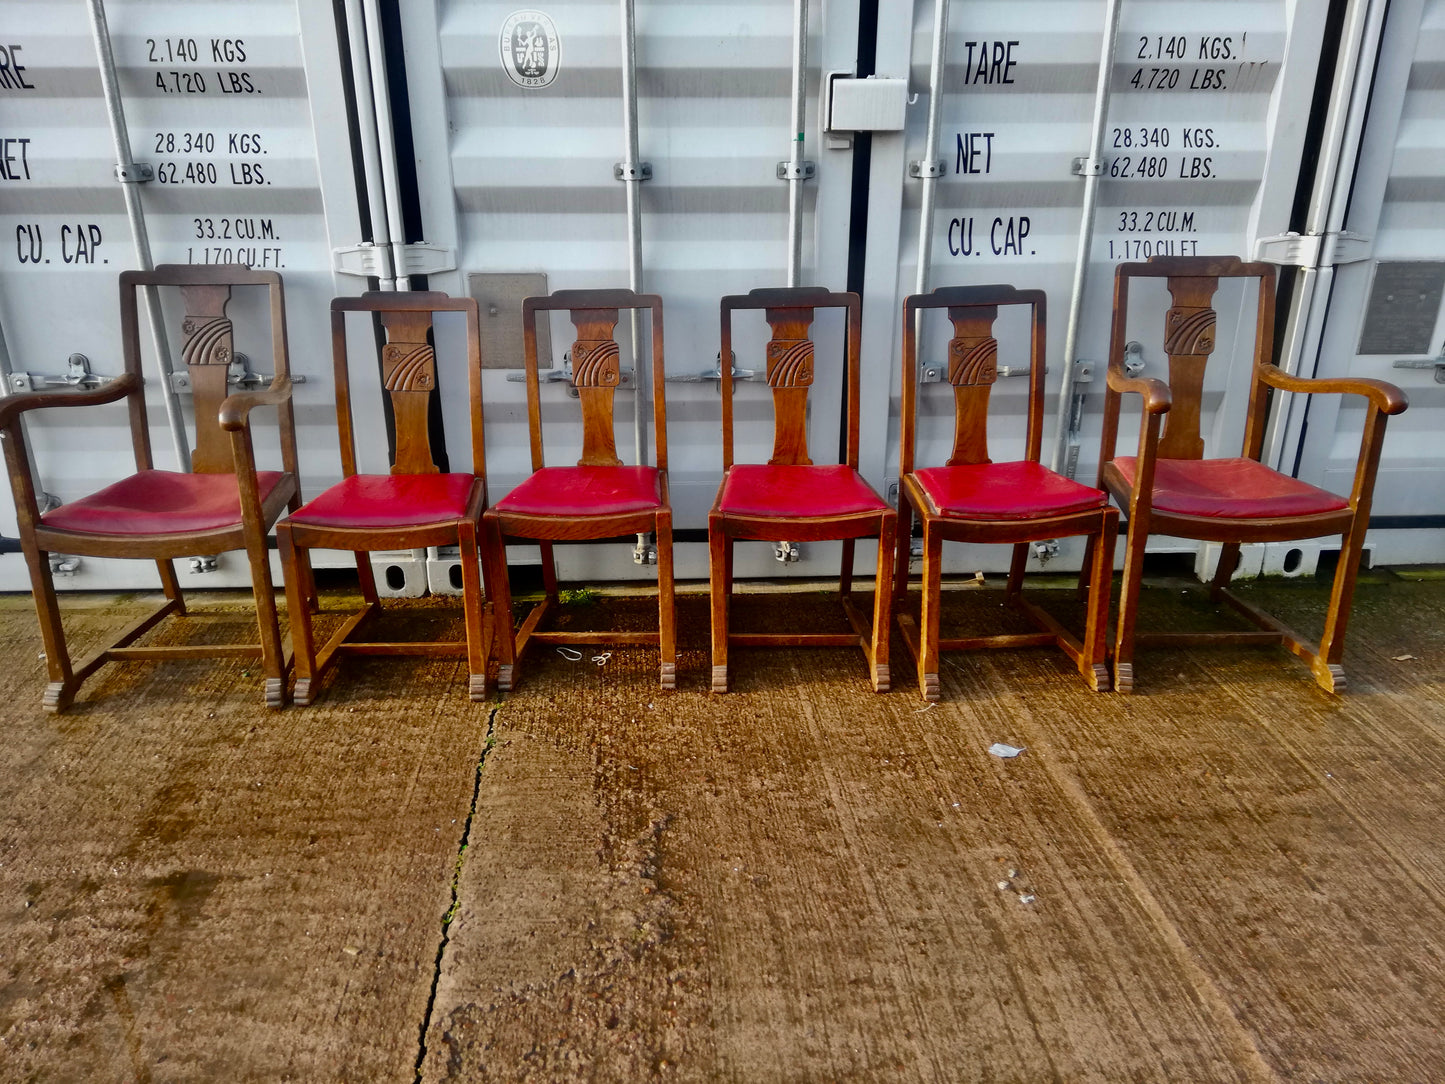 Set of 6 Vintage Art Deco dining chairs available for reupholstery and painting your choice of colour - price includes painting and upholstery